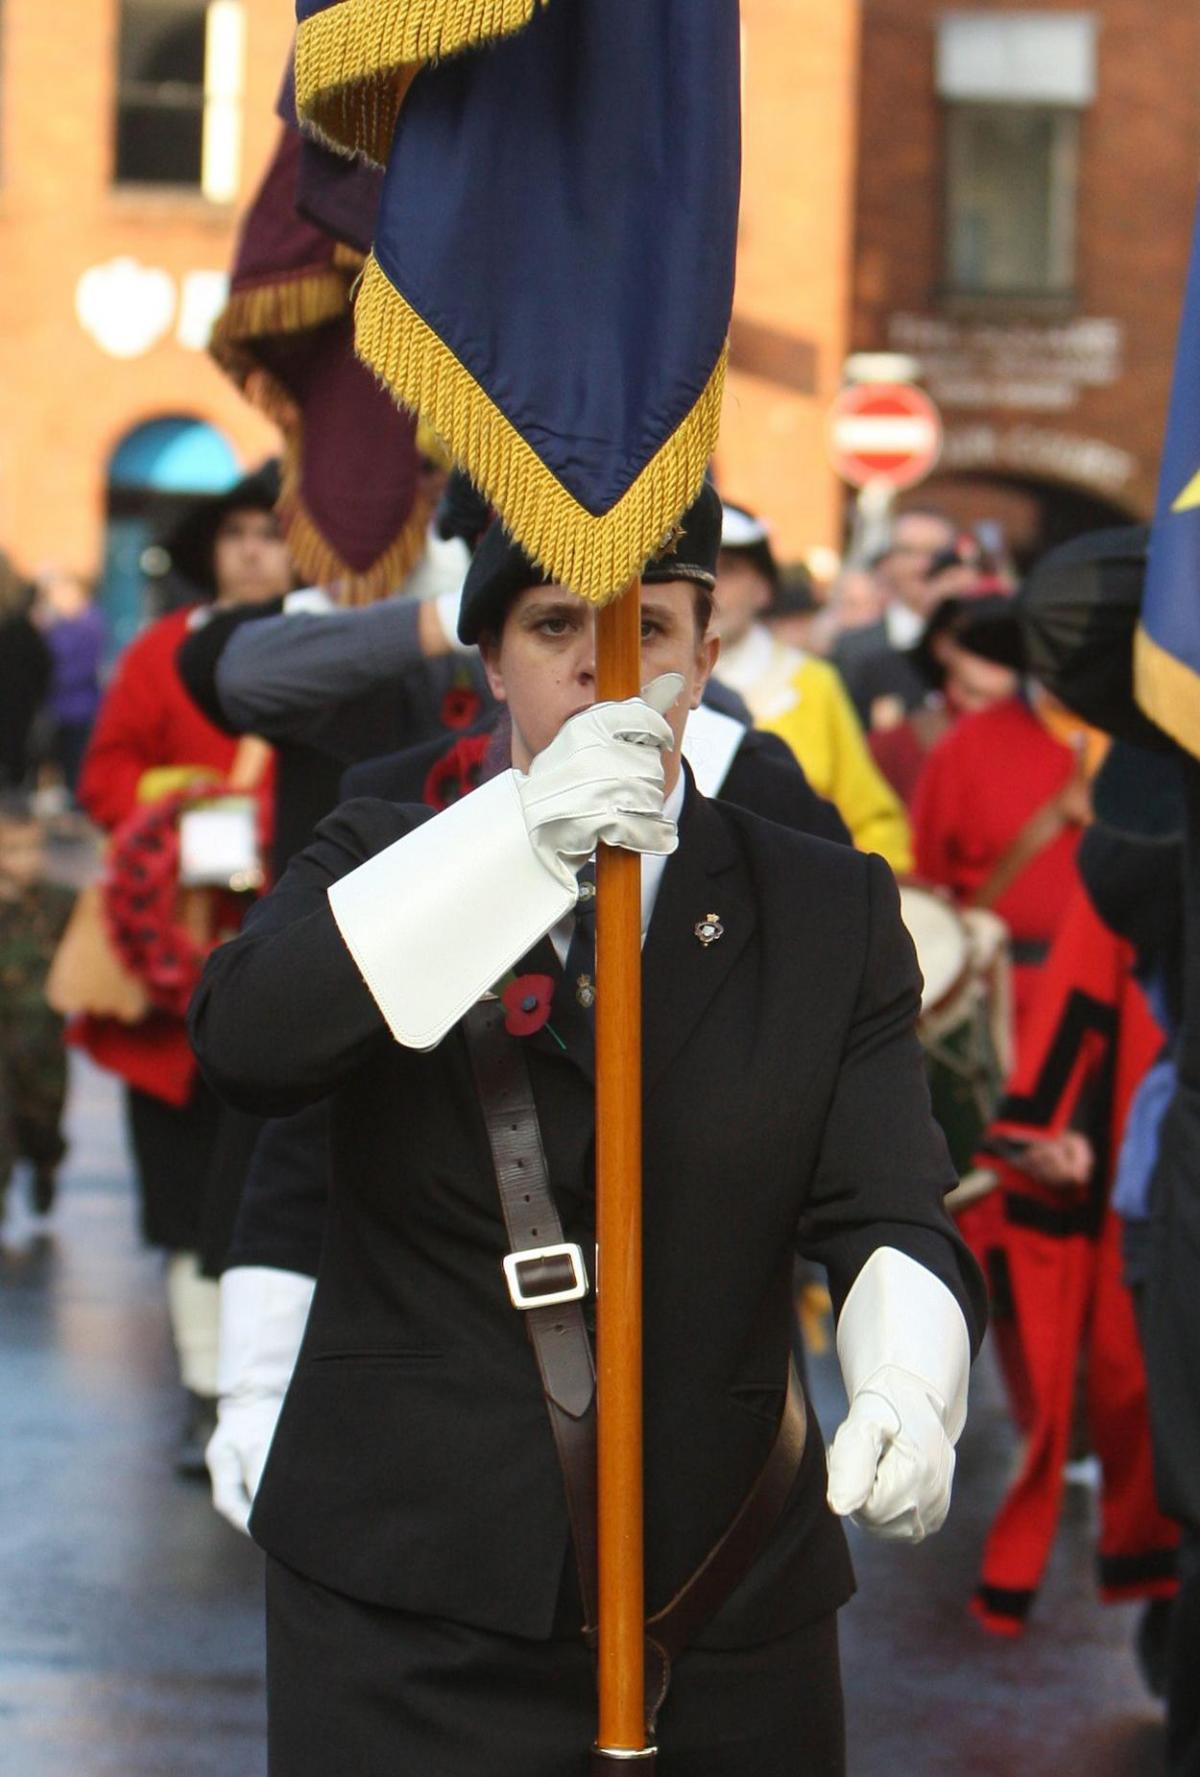 Pictures from Wimborne's Remembrance Sunday service by Richard Crease.